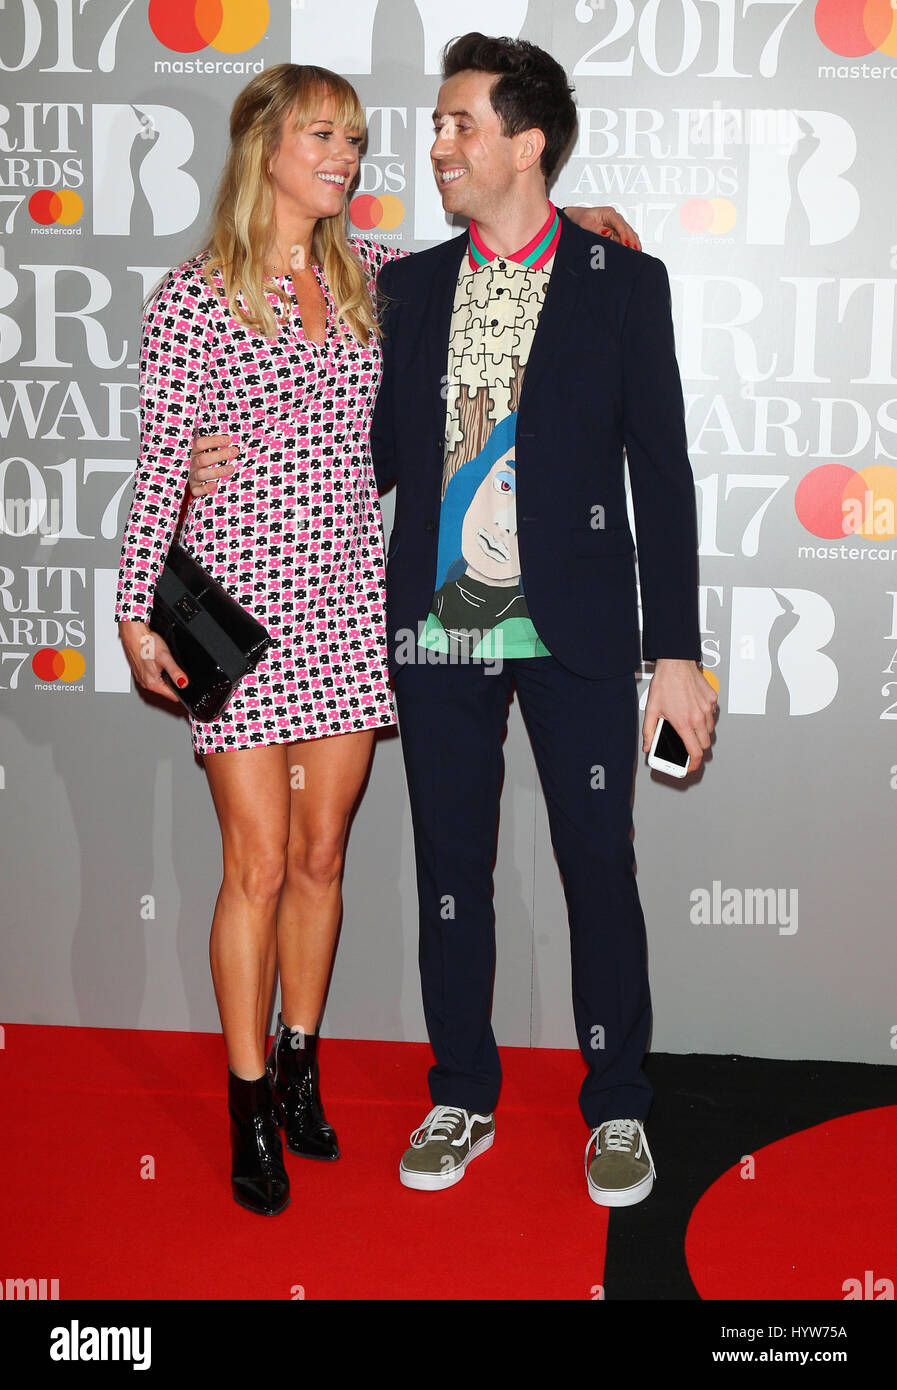 Nick Grimshaw and Sara Cox attend The BRIT Awards at The O2 on 22, Feb, 2017 in London Stock Photo